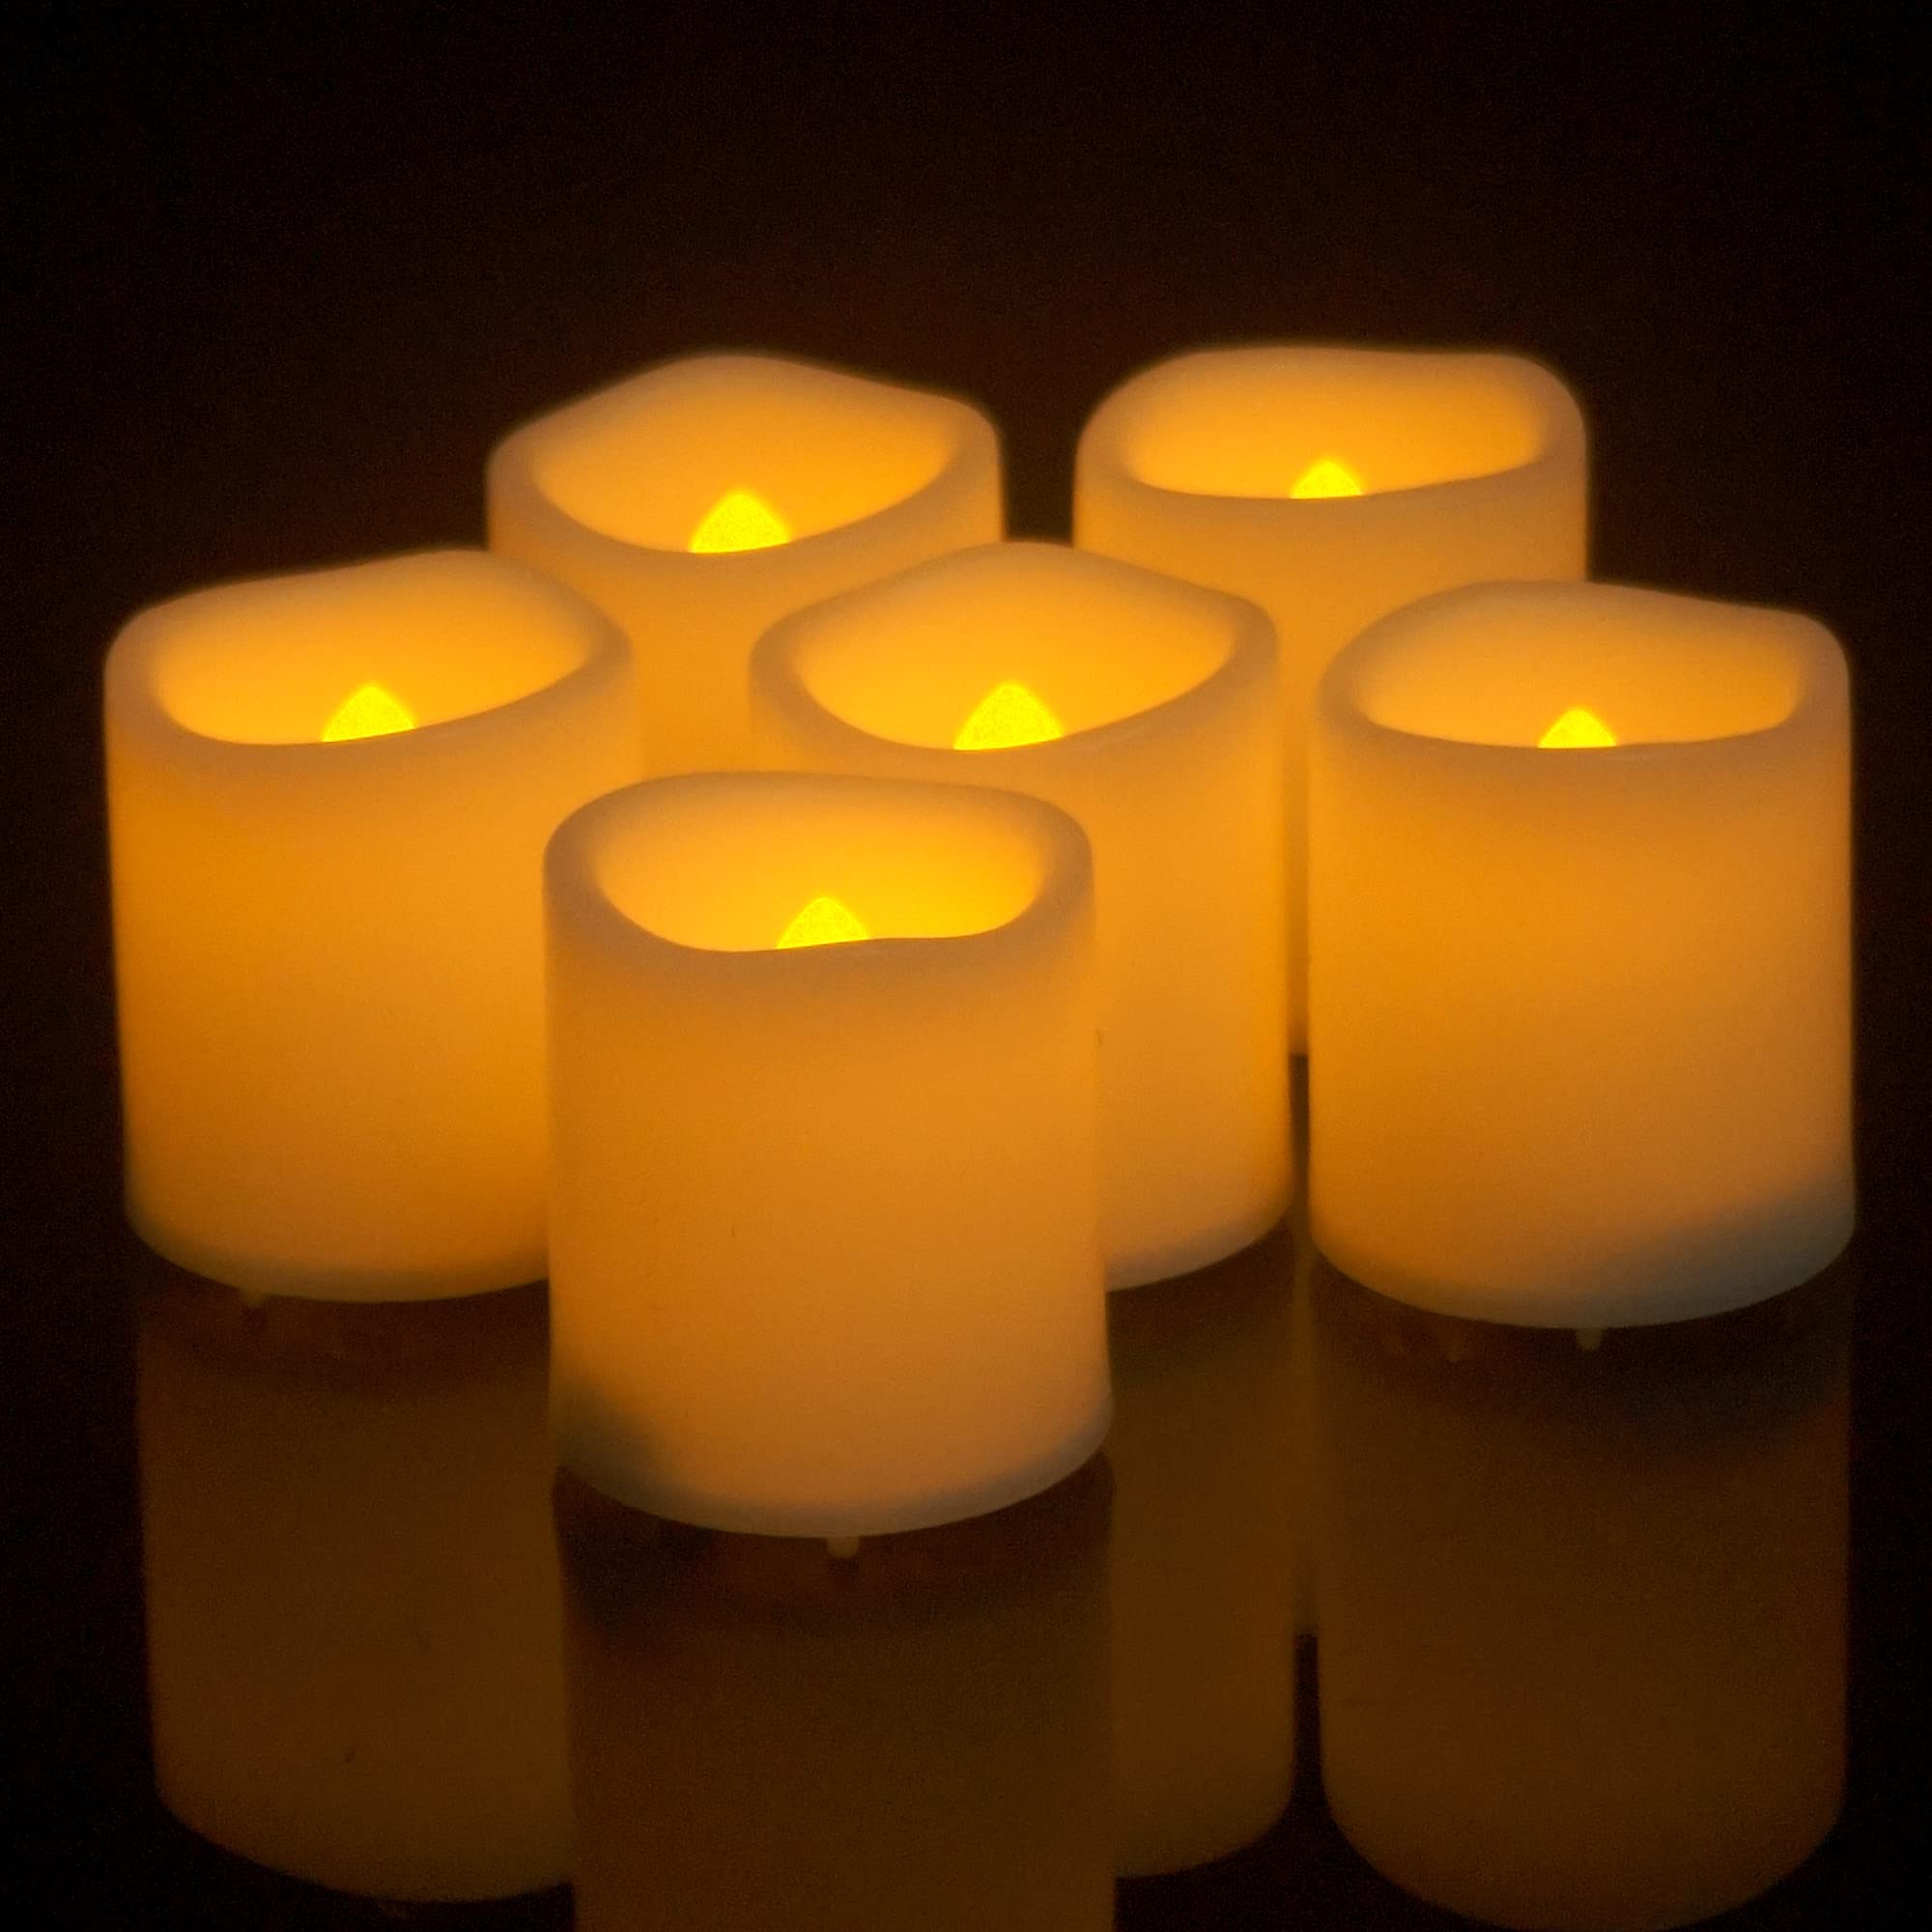 Flameless Fake Battery Operated LED Votive Candles Flickering Powered Bright Tea Lights for Birthday Party Bridal Shower Baby Shower Wedding Christmas Home Decorations Battery Included, Set of 6  - Like New